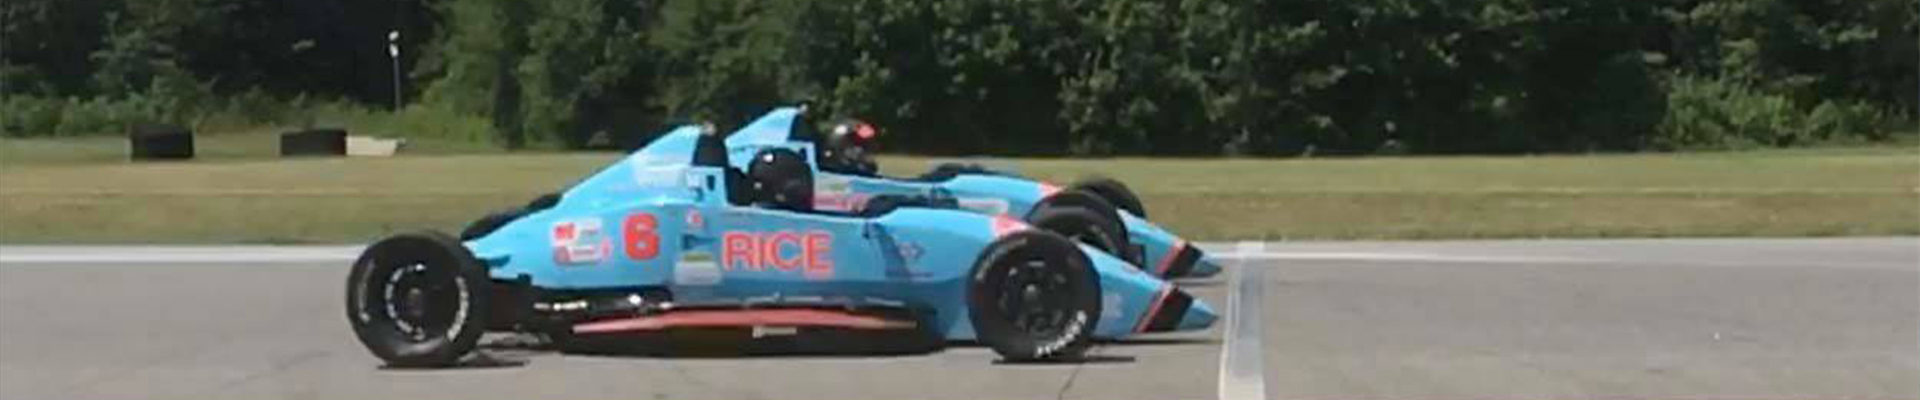 Trey Burke to RiceRace for FRP F1600